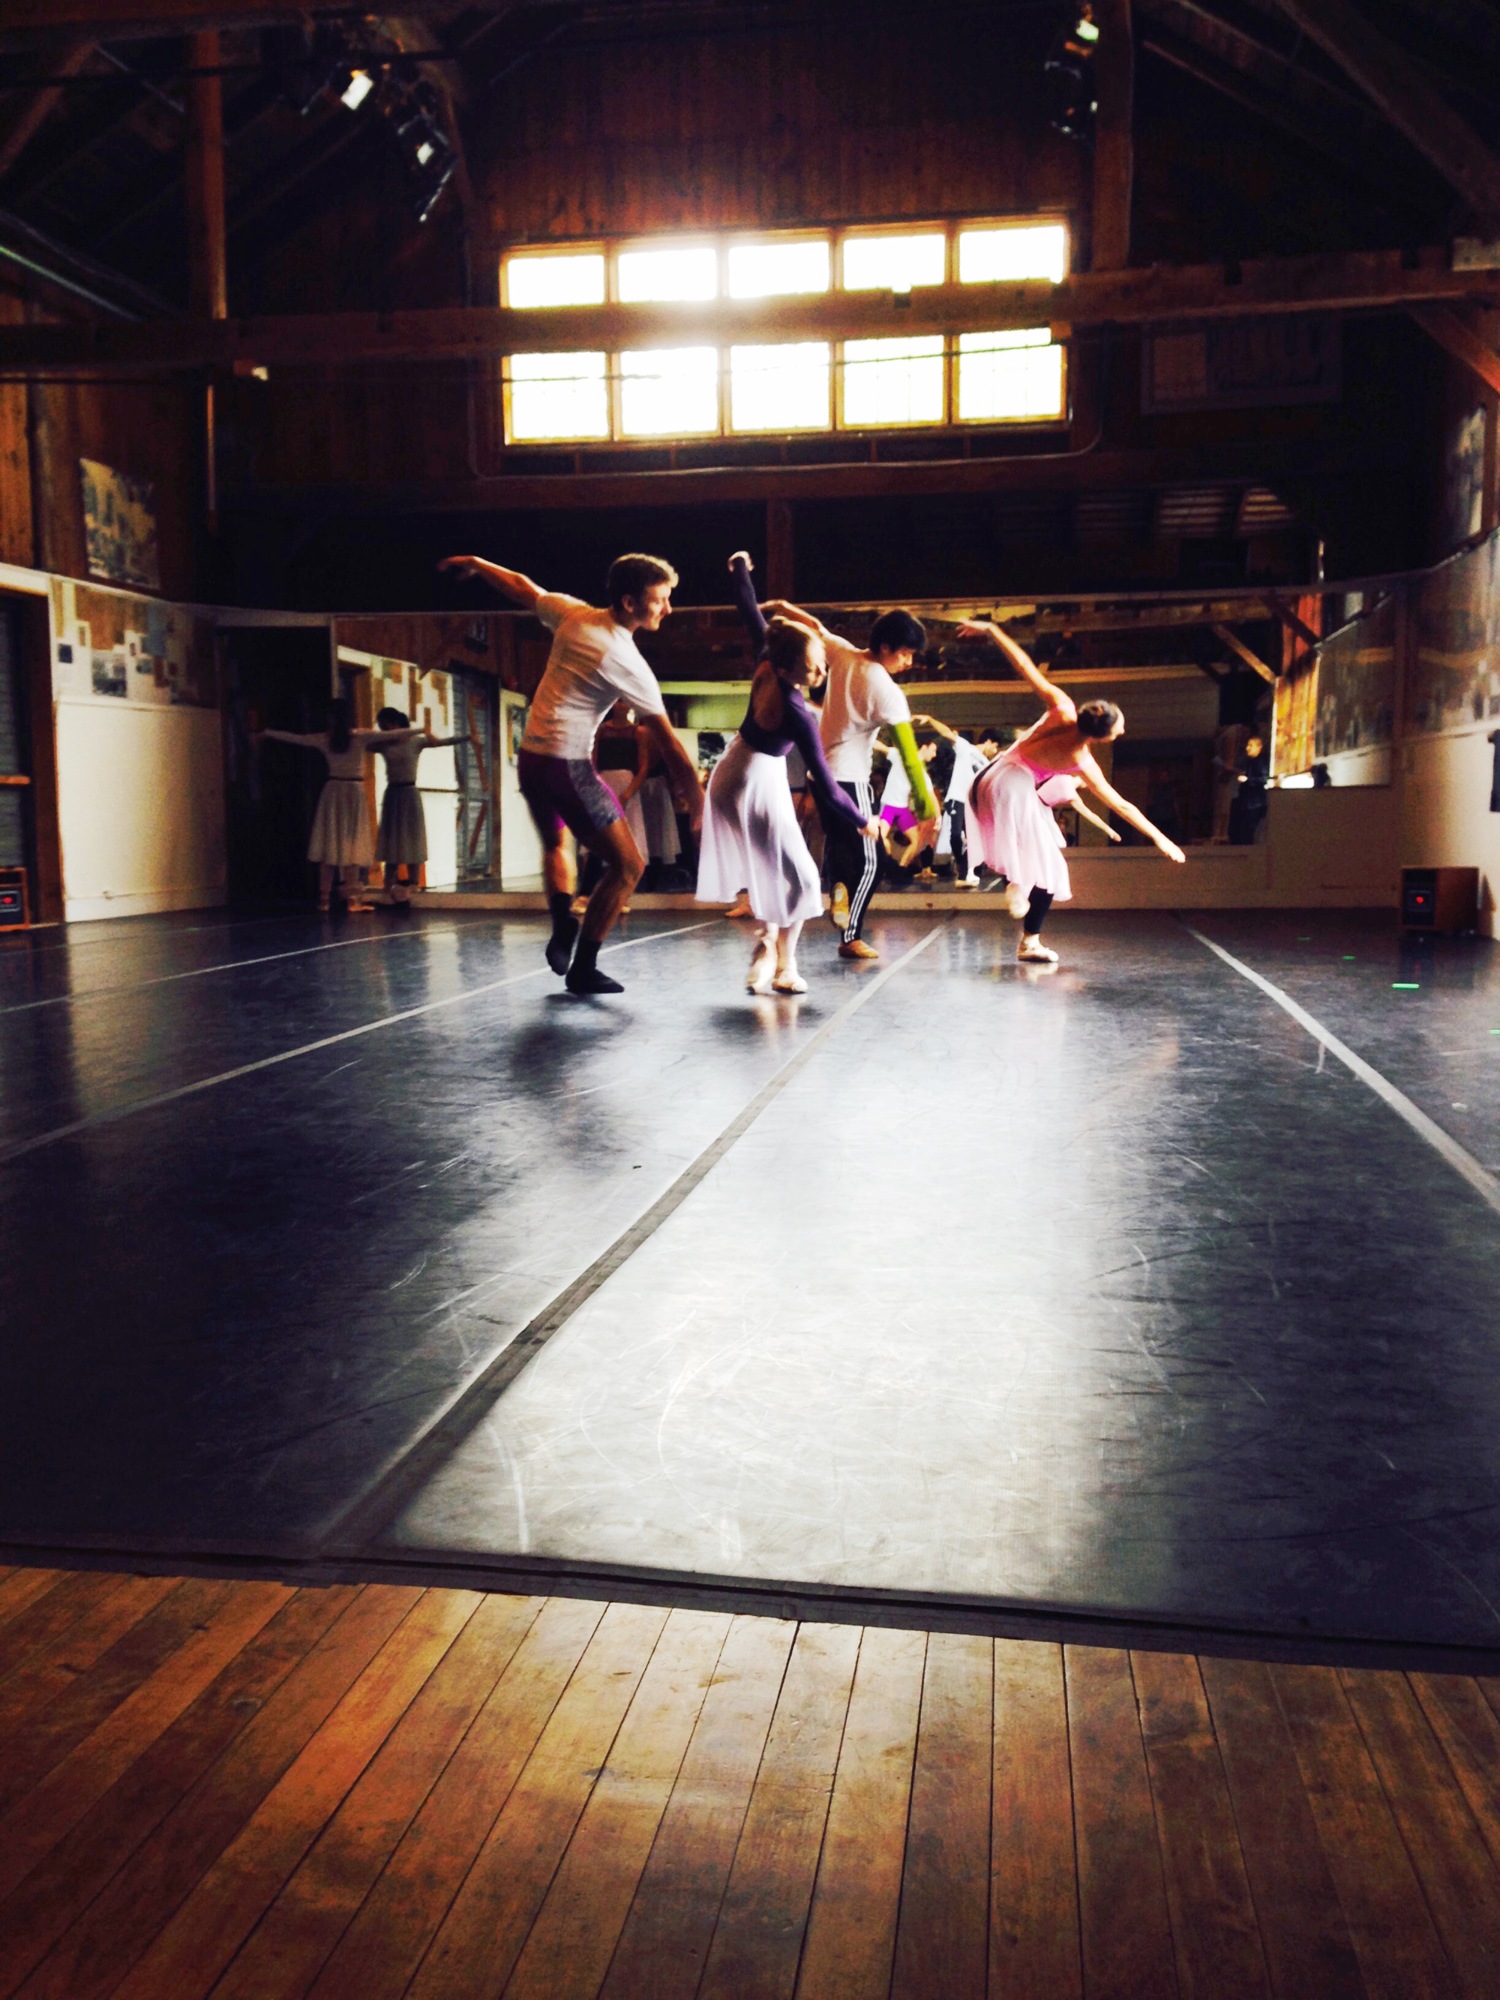 Sarasota Ballet company members rehearsing for their performances at Jacob's Pillow in a rehearsal space converted from an old barn onsite.